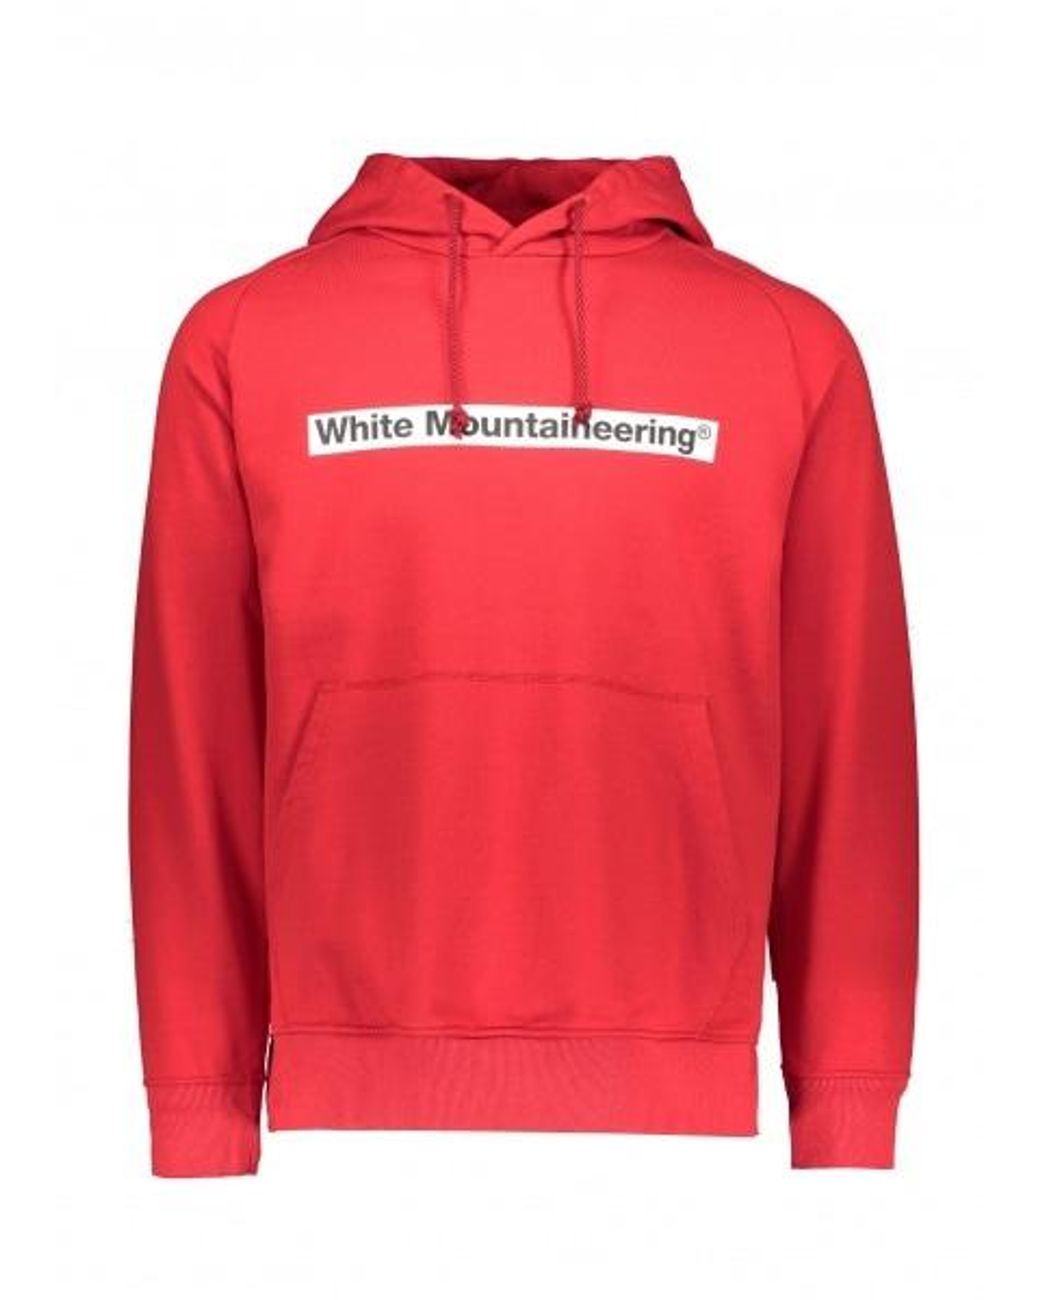 White Mountaineering Logo Hoodie in Red 